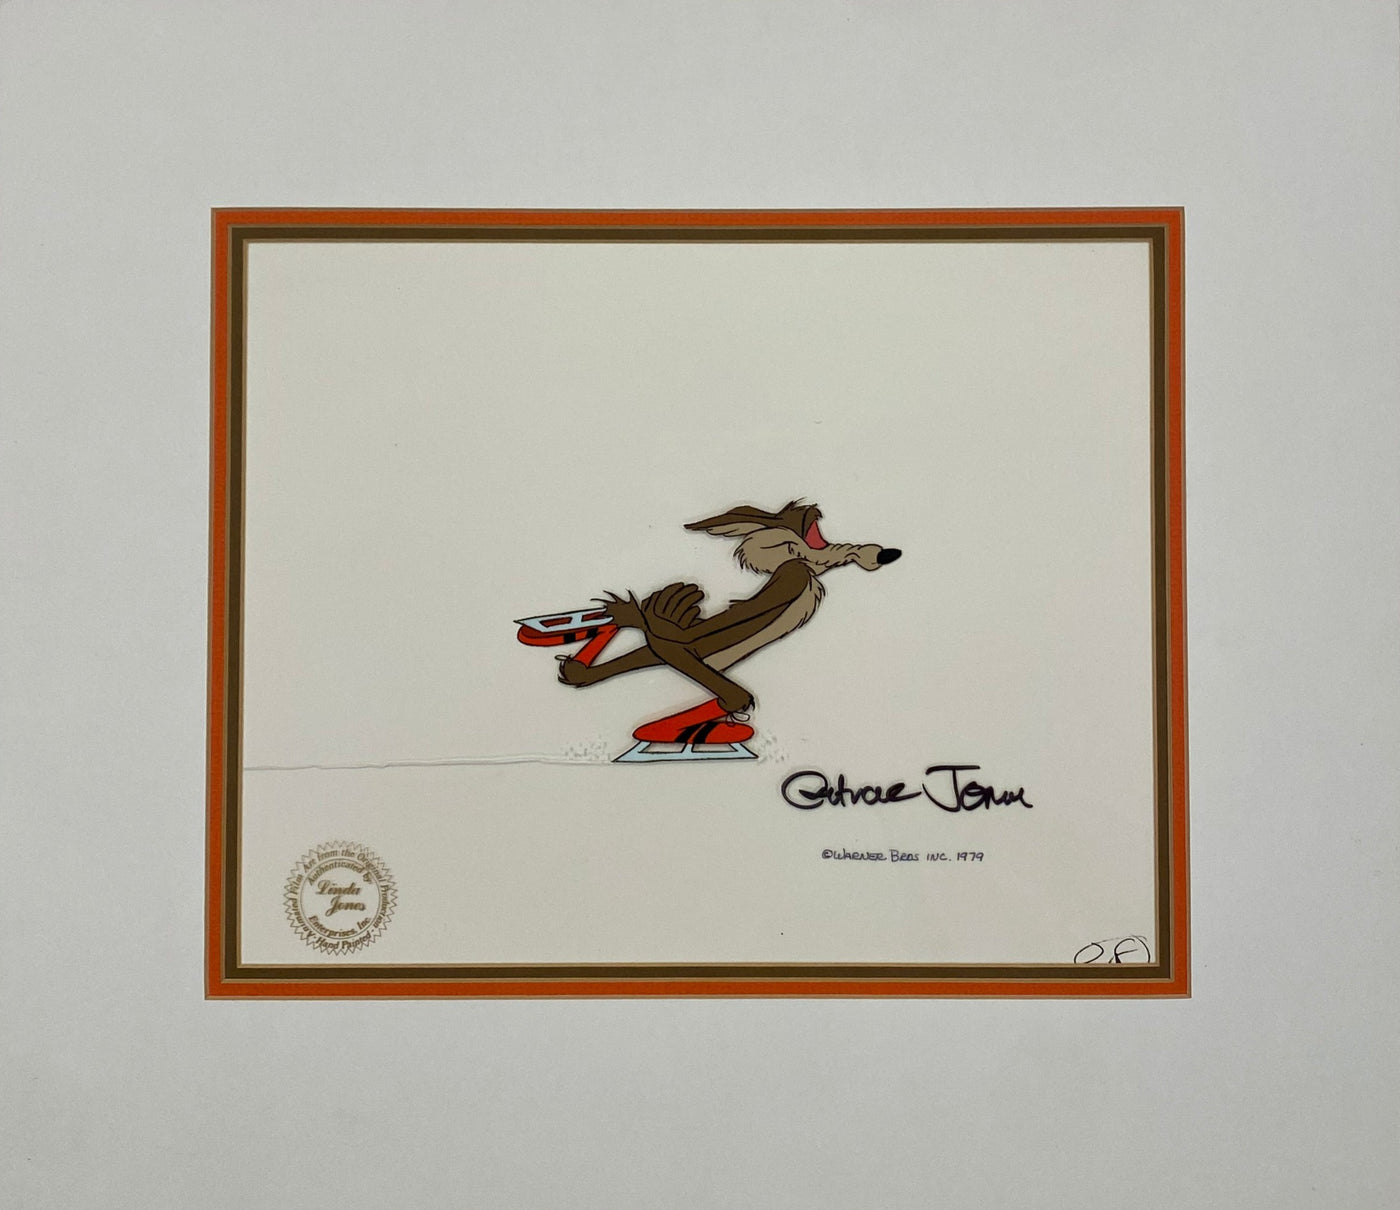 Original Warner Brothers Production Cel from "Freeze Frame" featuring Wile E. Coyote, Signed by Chuck Jones